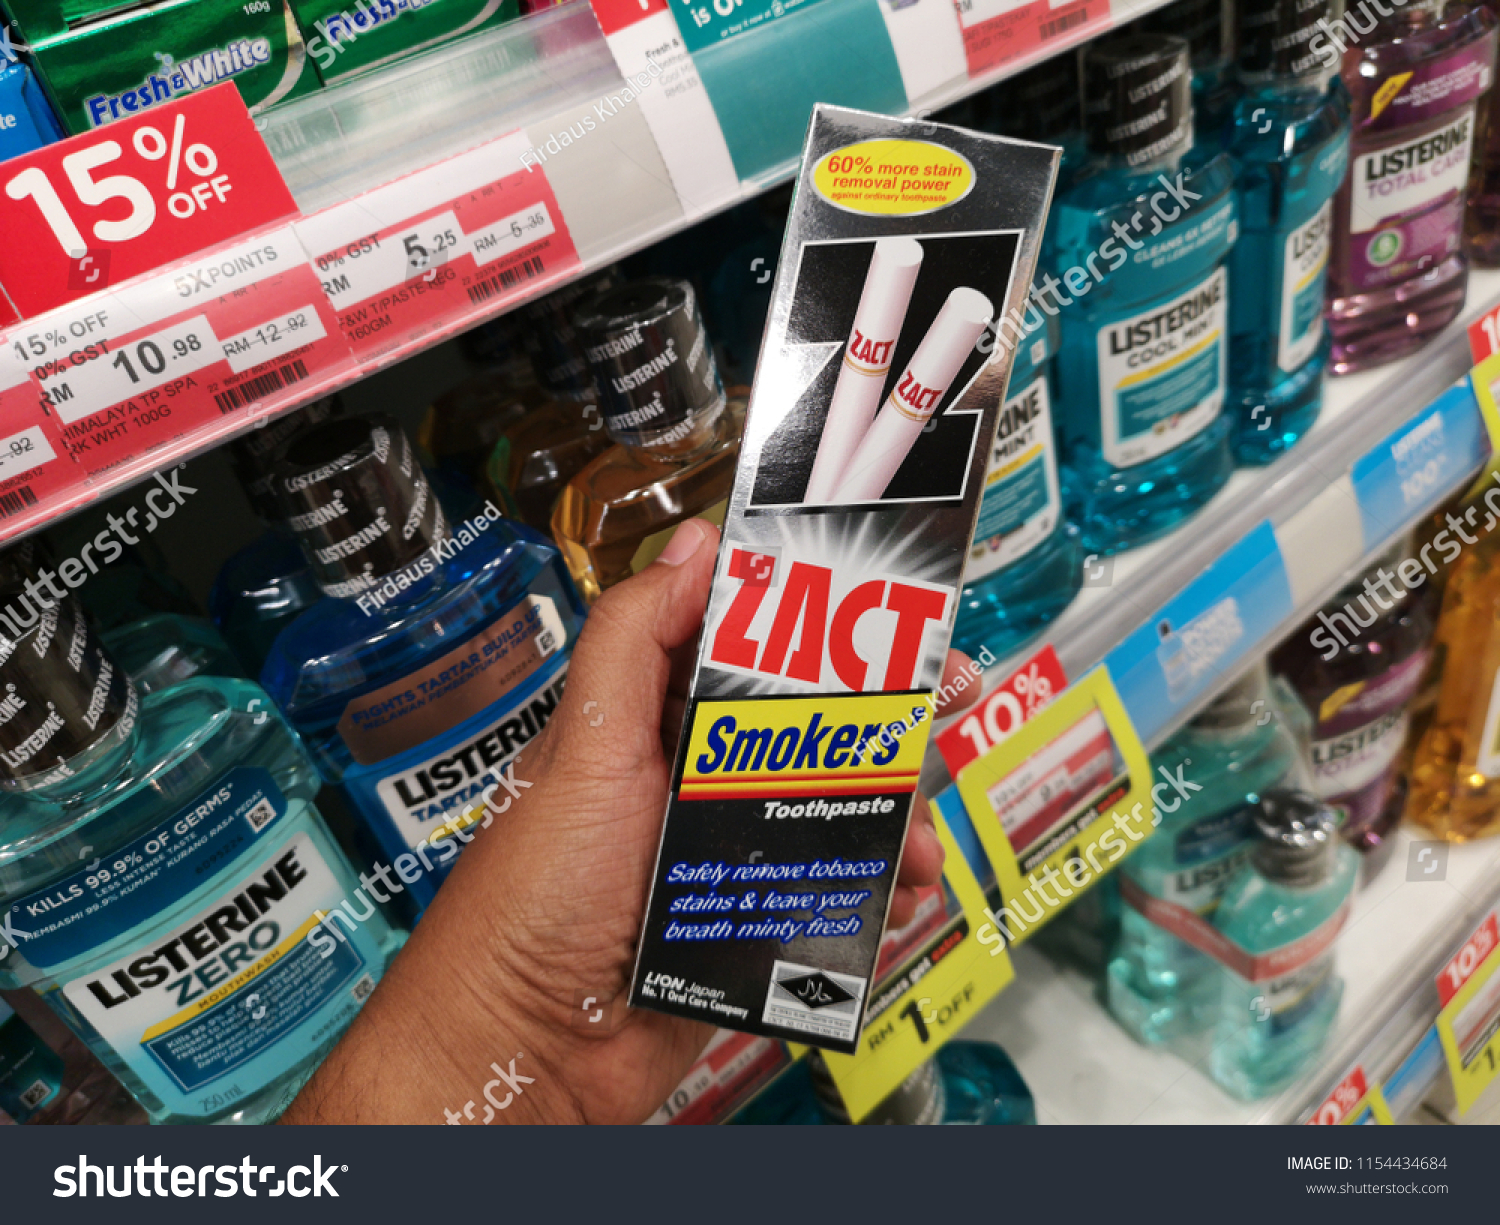 Image result for zact toothpaste